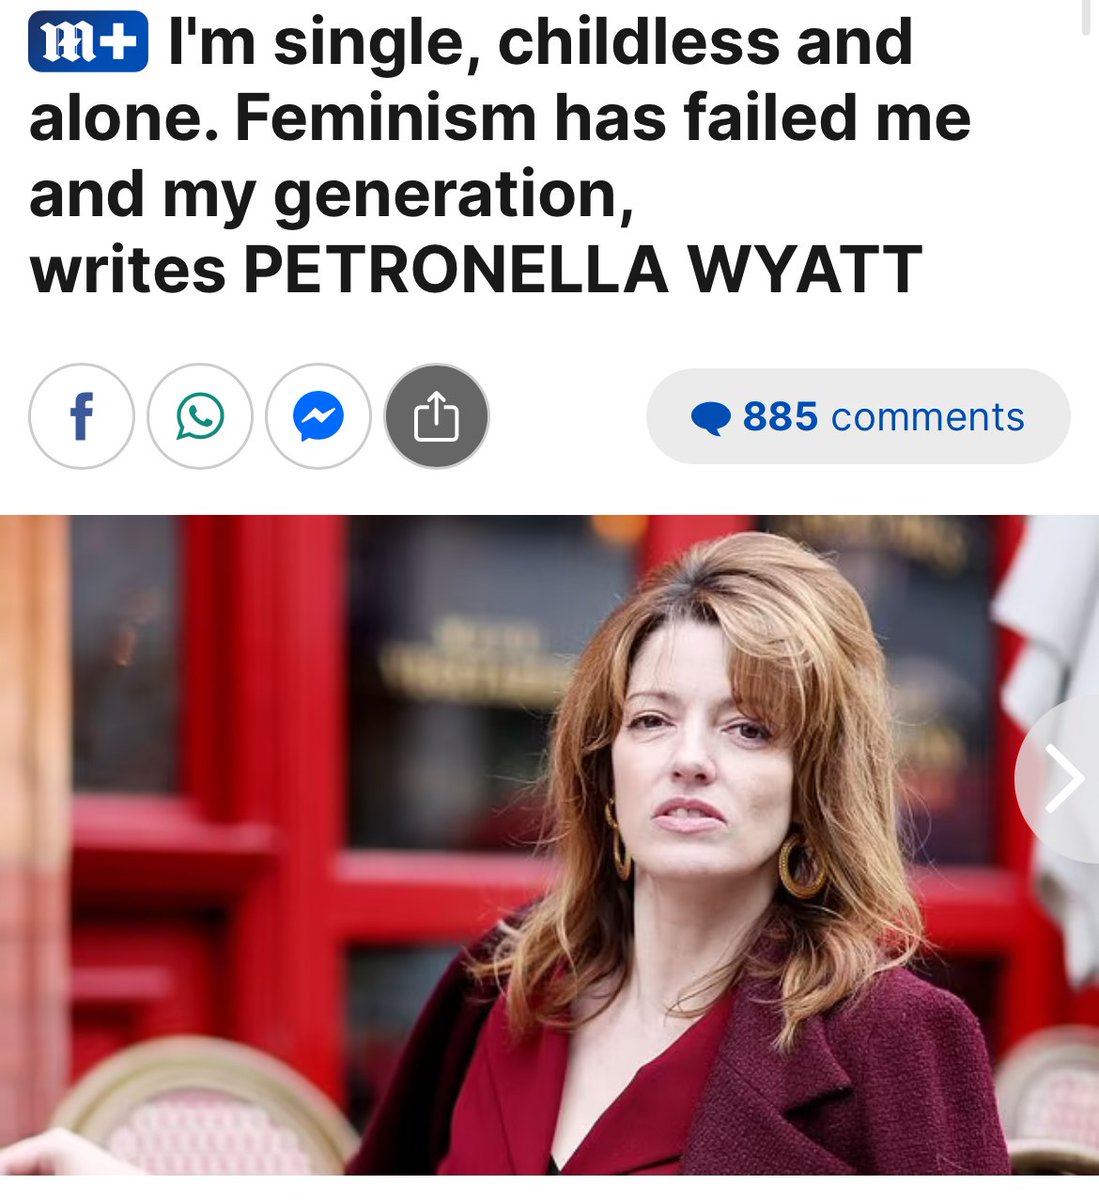 #Feminism literally working as designed.